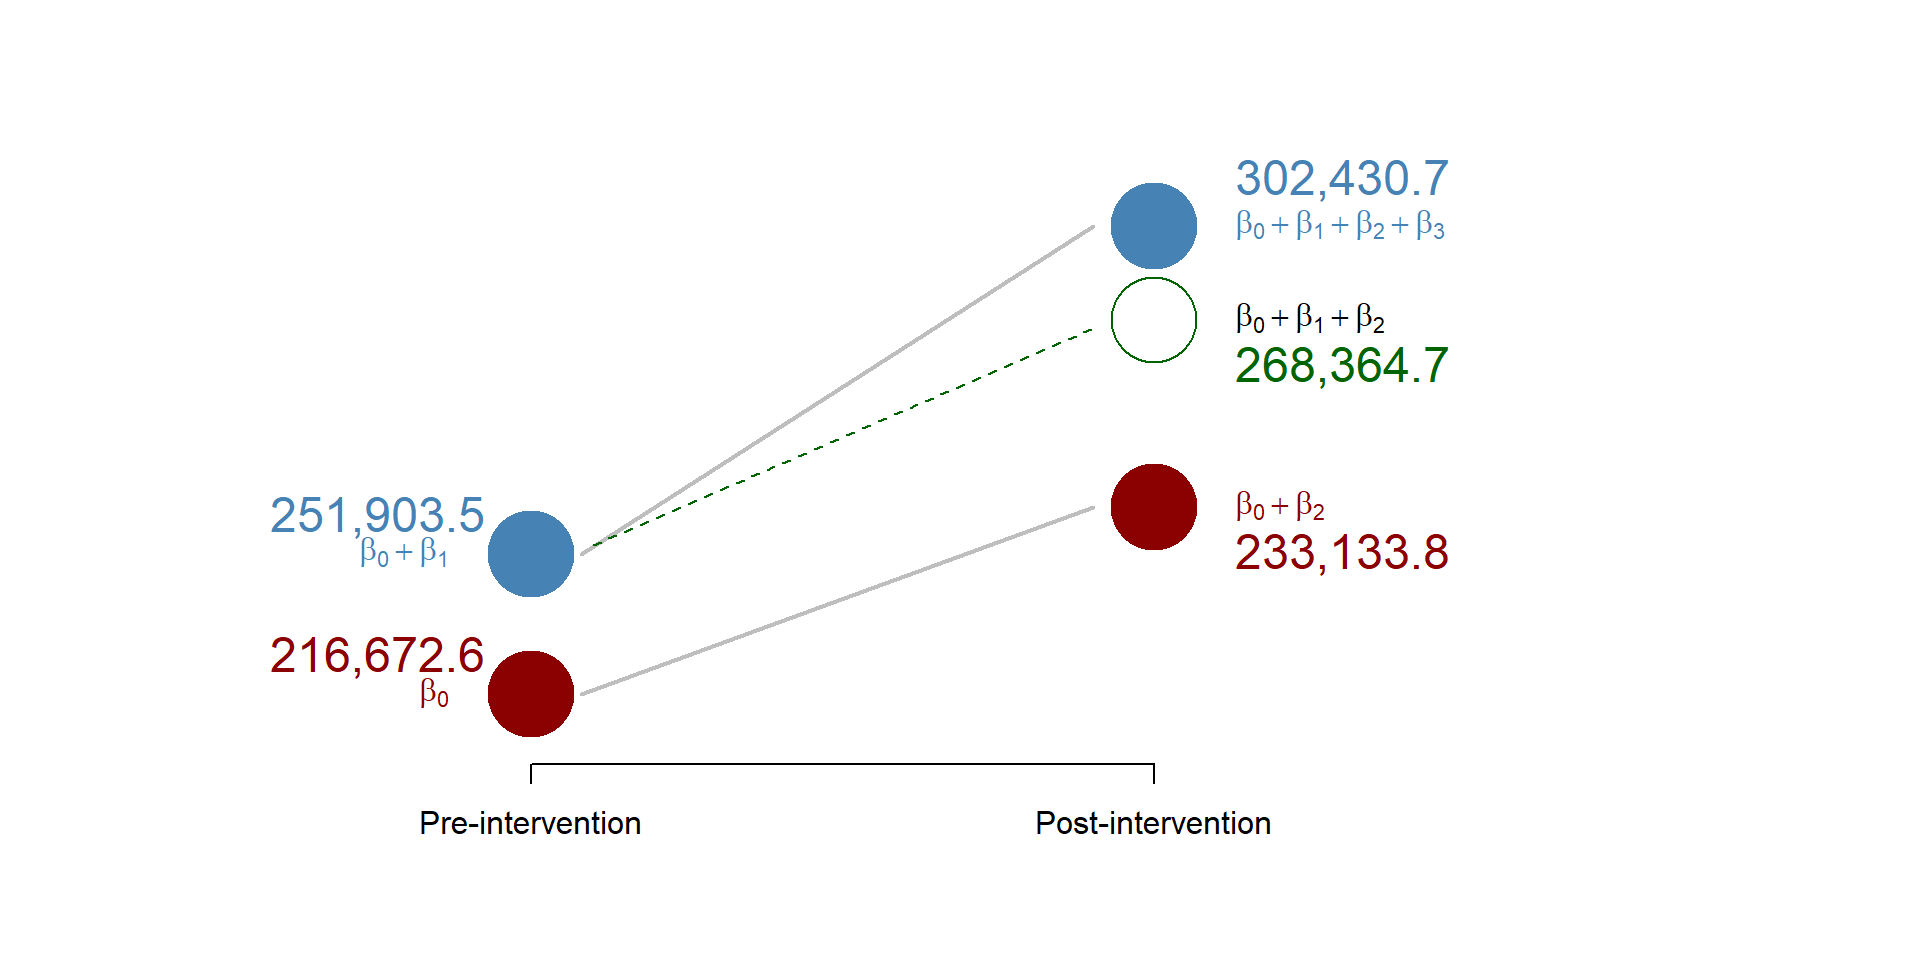 Results from the working example